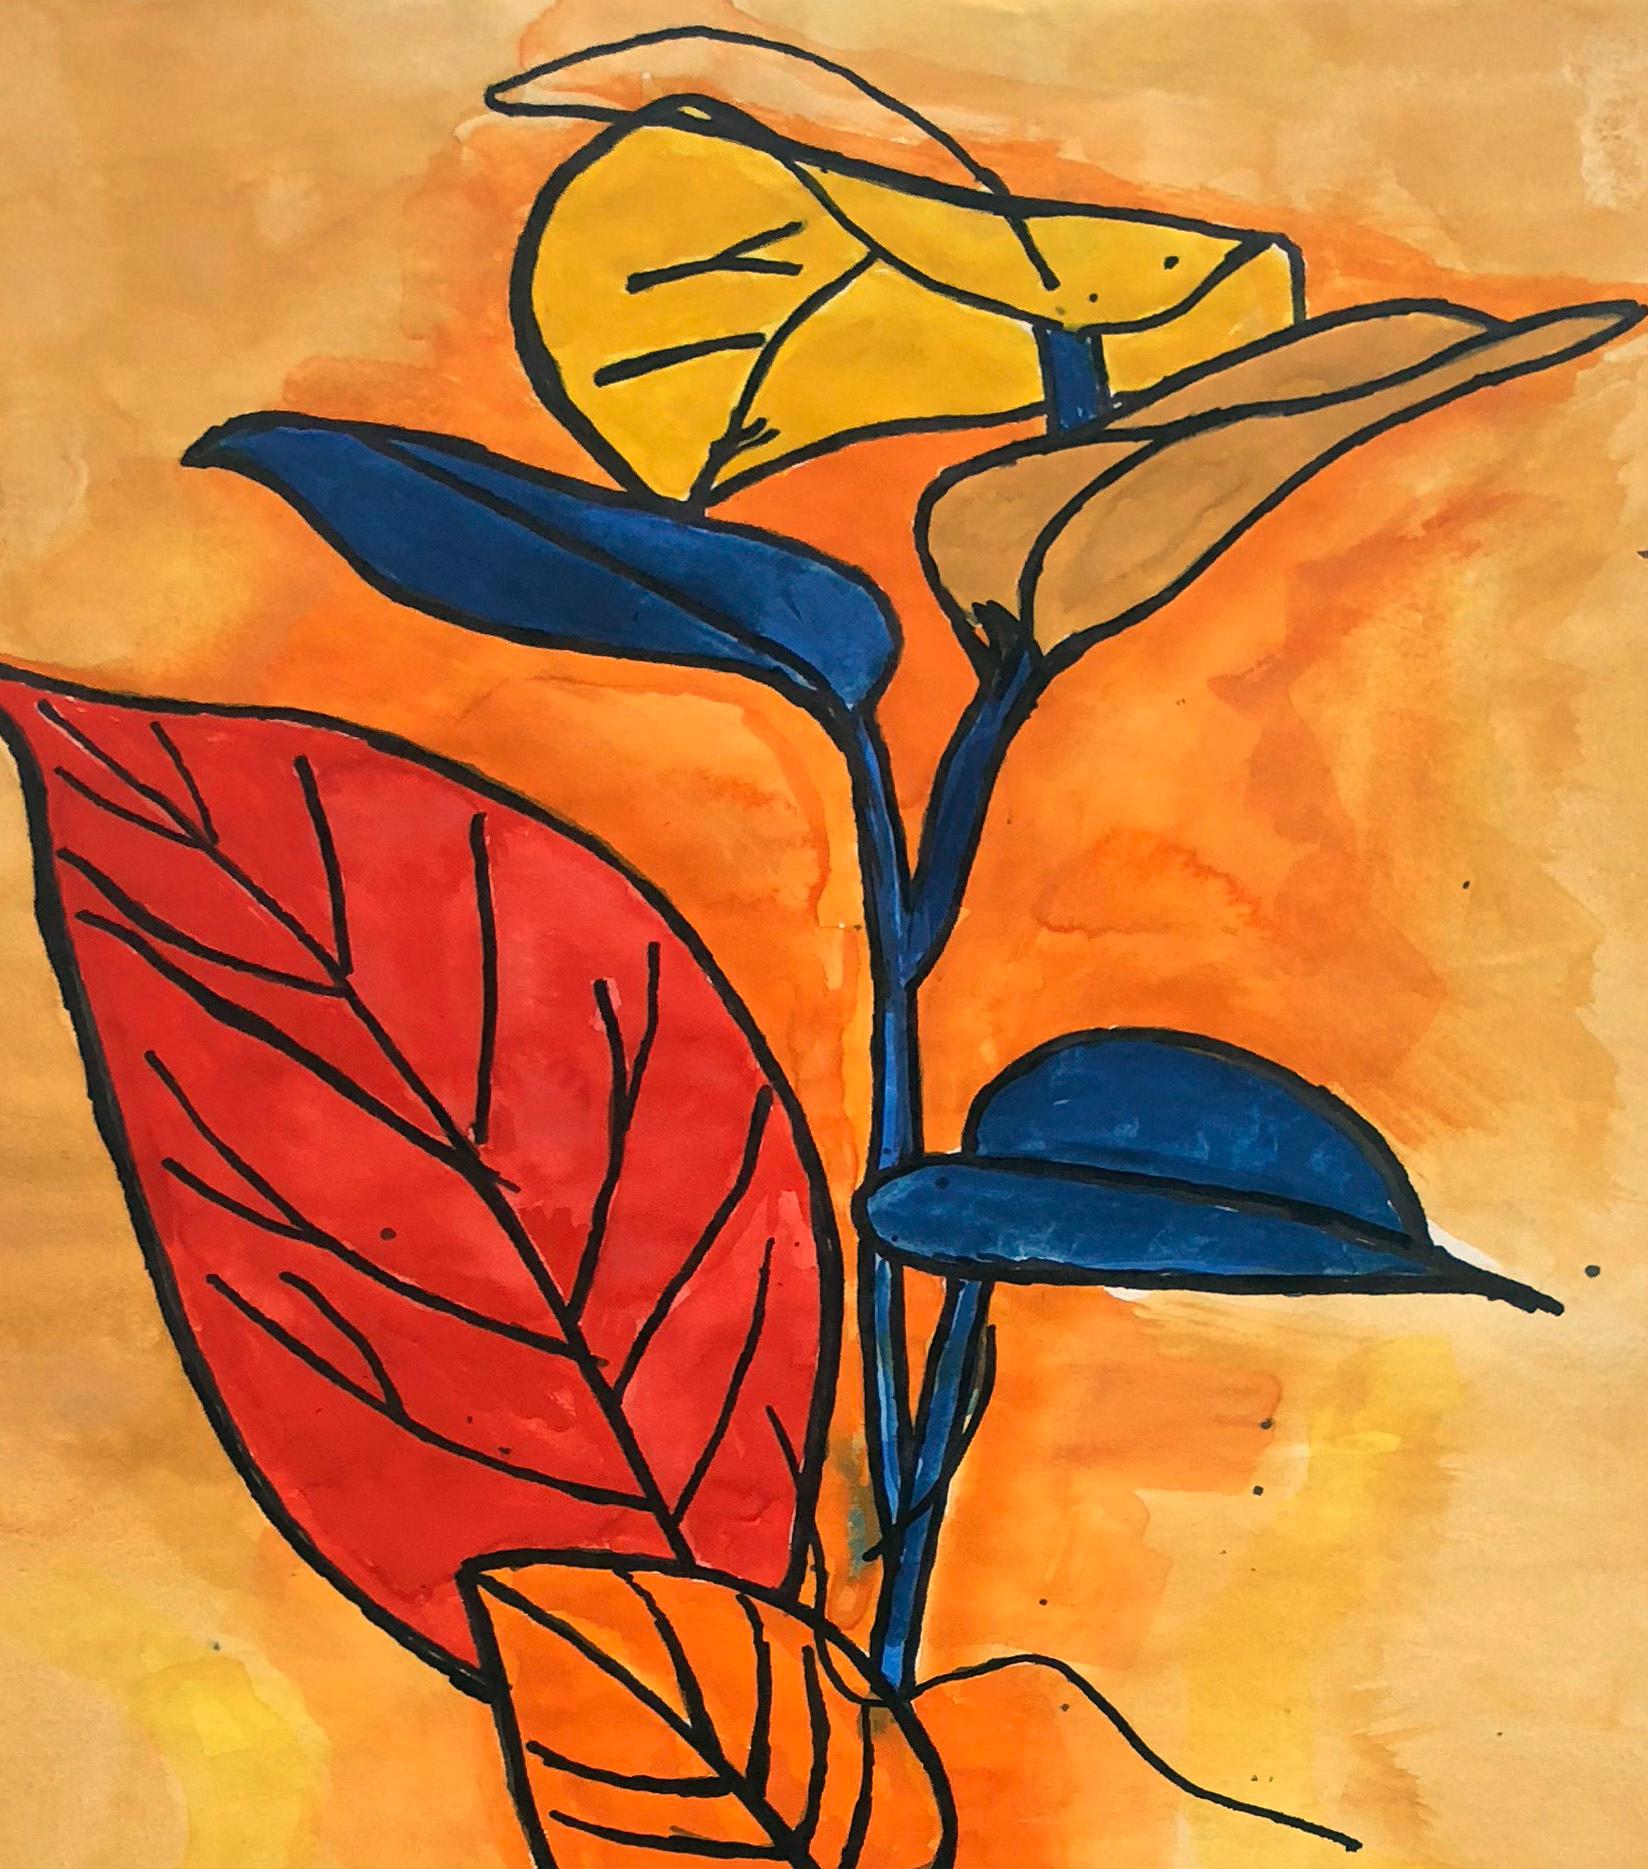 Flower by Celso Castro
Watercolor and ink on archival paper
Individual size: 15.9 in. H x 11.5 in. W
One of a kind
2018

Celso Castro-Daza was born in Valledupar, Colombia. He has a BFA from Pratt Institute, 1981 and has exhibited extensively